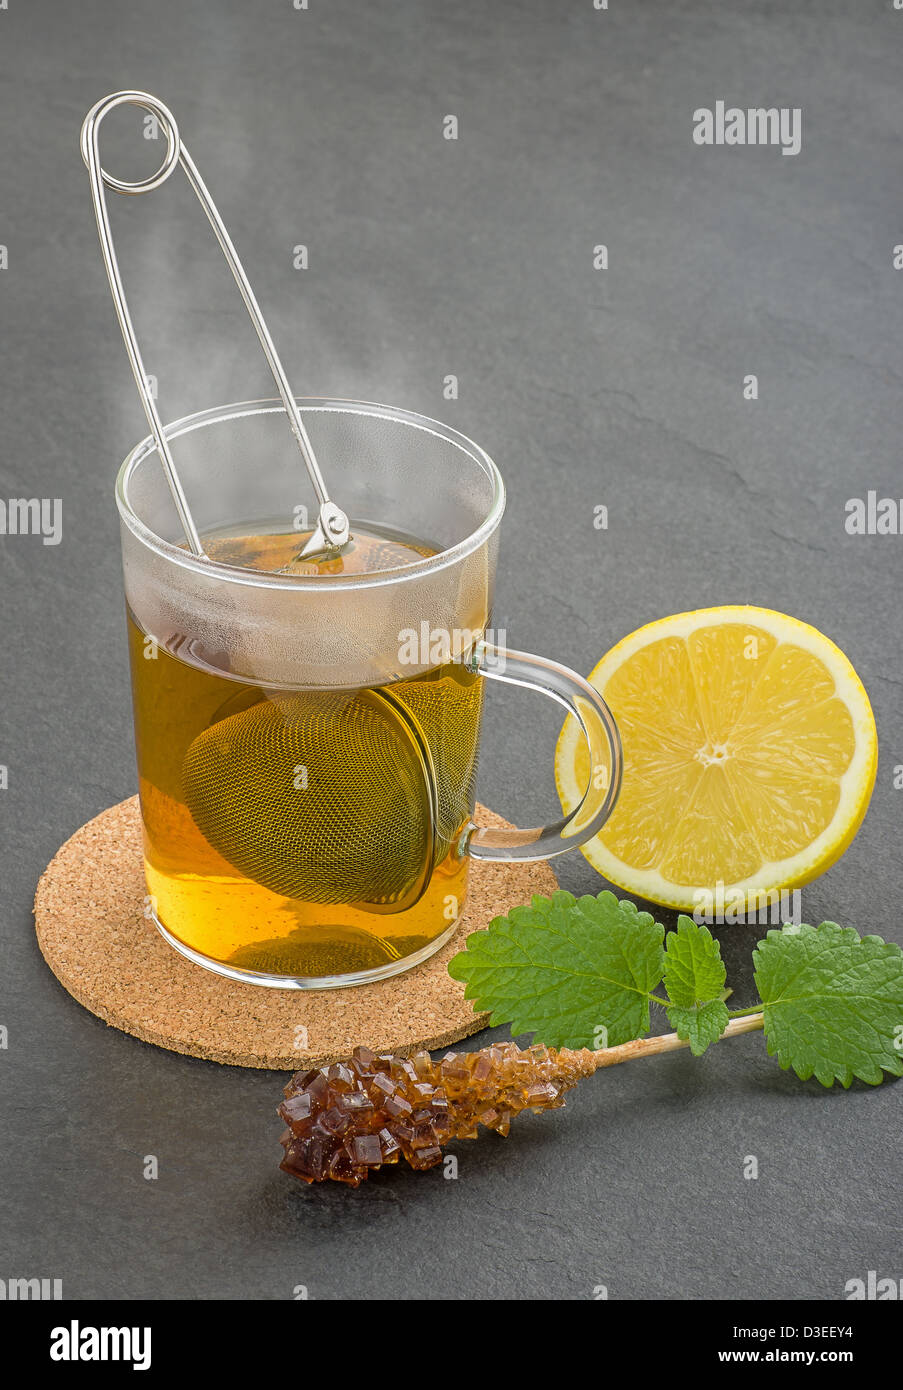 Steaming cup of tea with teastrainer on a slate plate Stock Photo